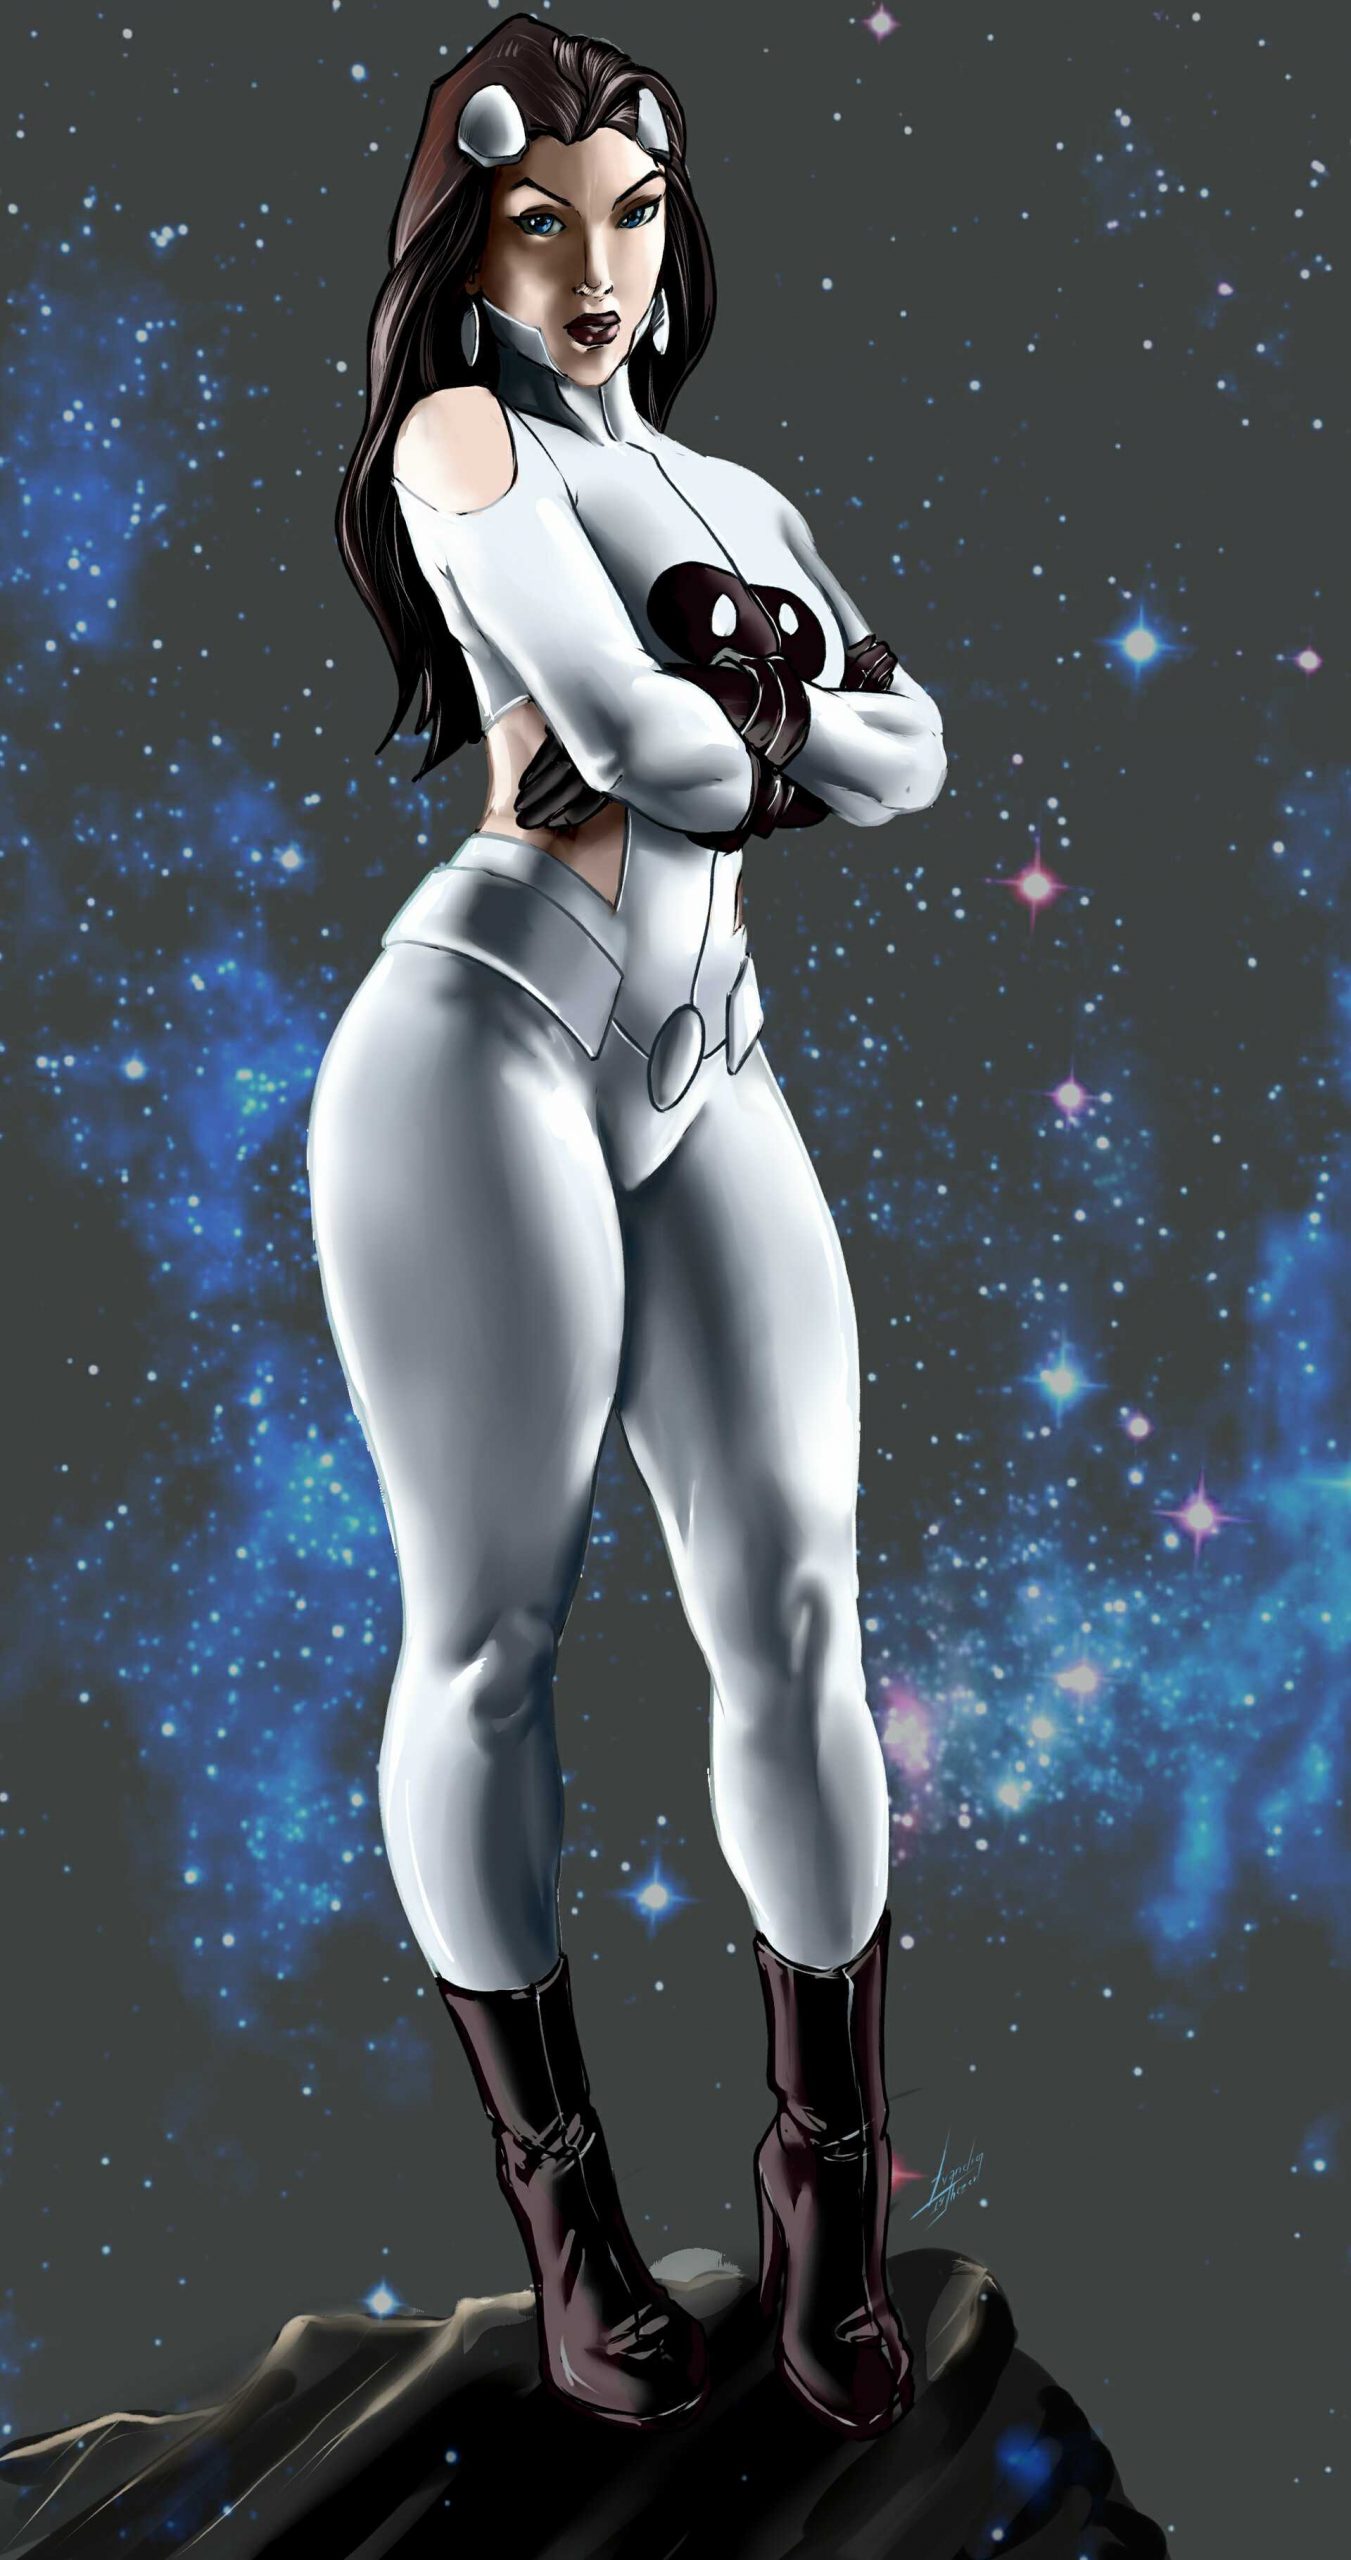 39 Hot Pictures Of Phantom Girl Are A Genuine Exemplification Of Excellence 11